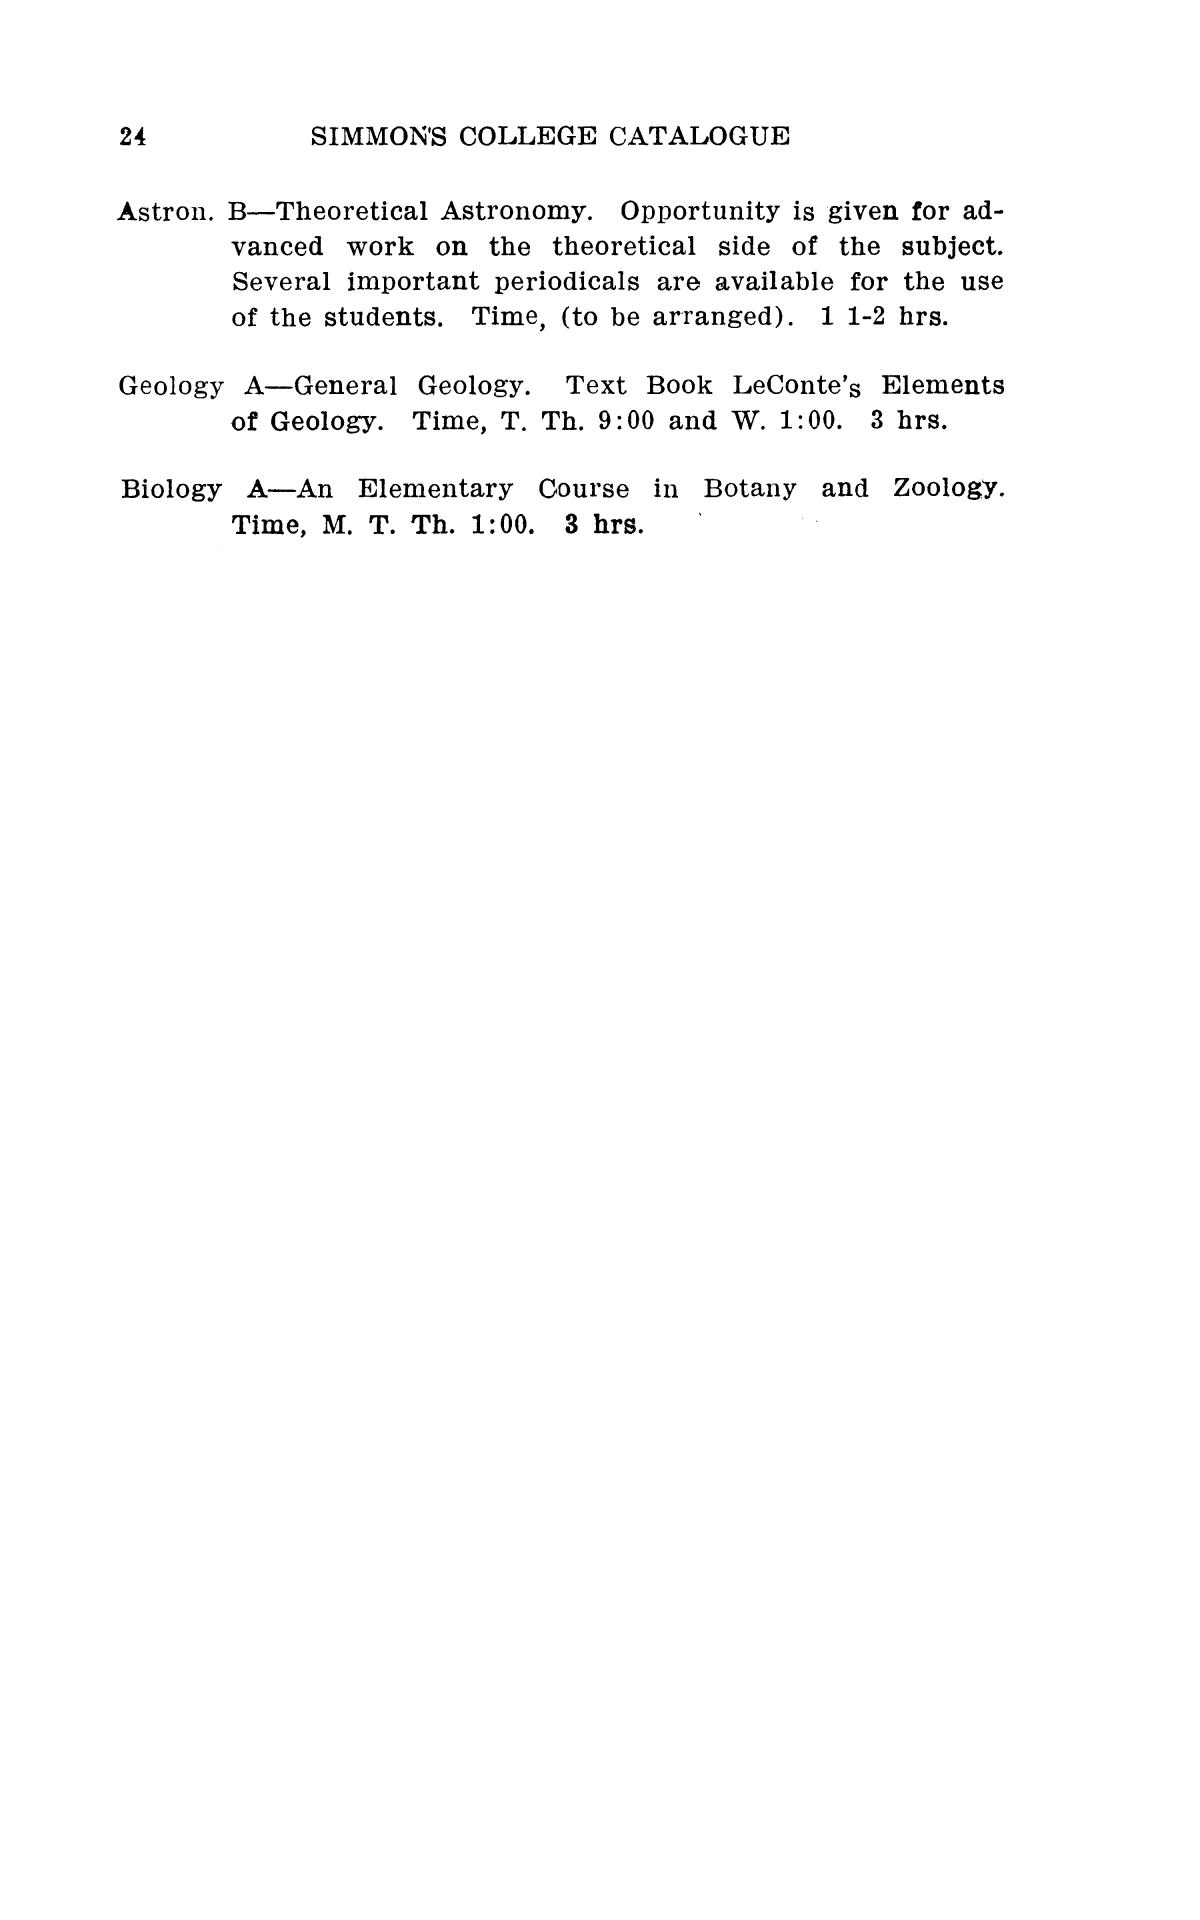 Catalogue of Simmons College, 1909-1910
                                                
                                                    24
                                                